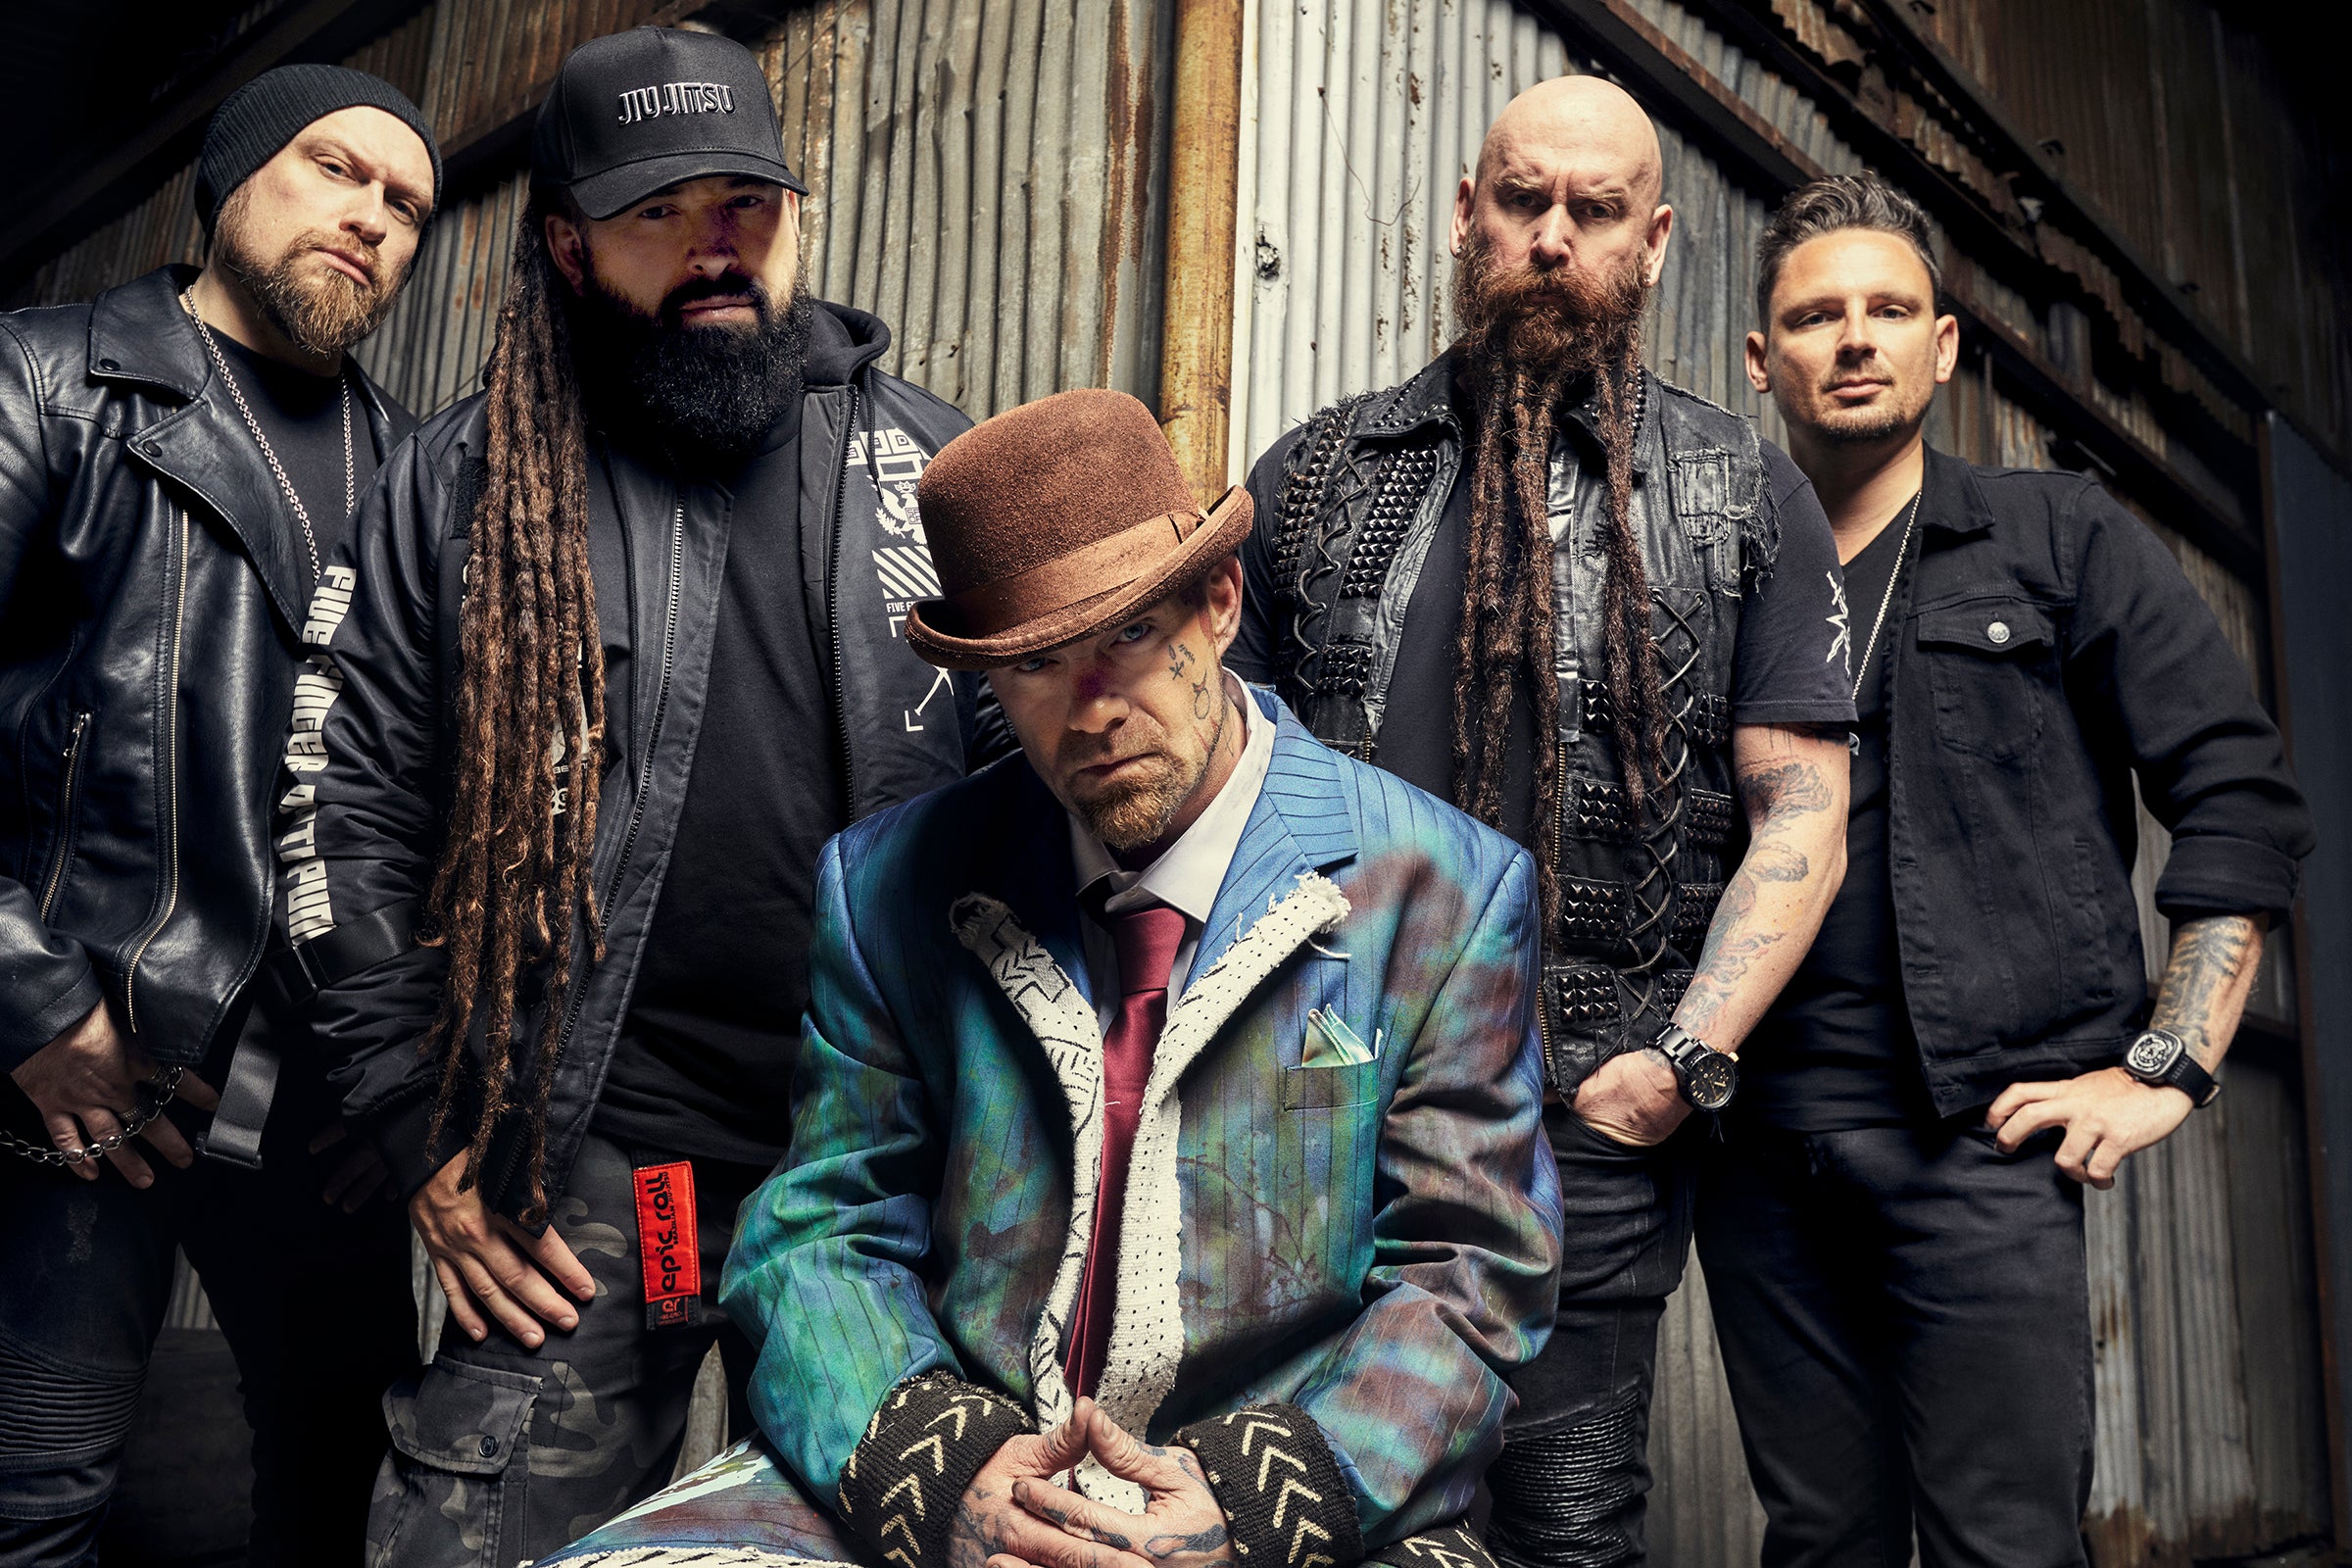 Five Finger Death Punch + Brantley Gilbert at Fisher Theater